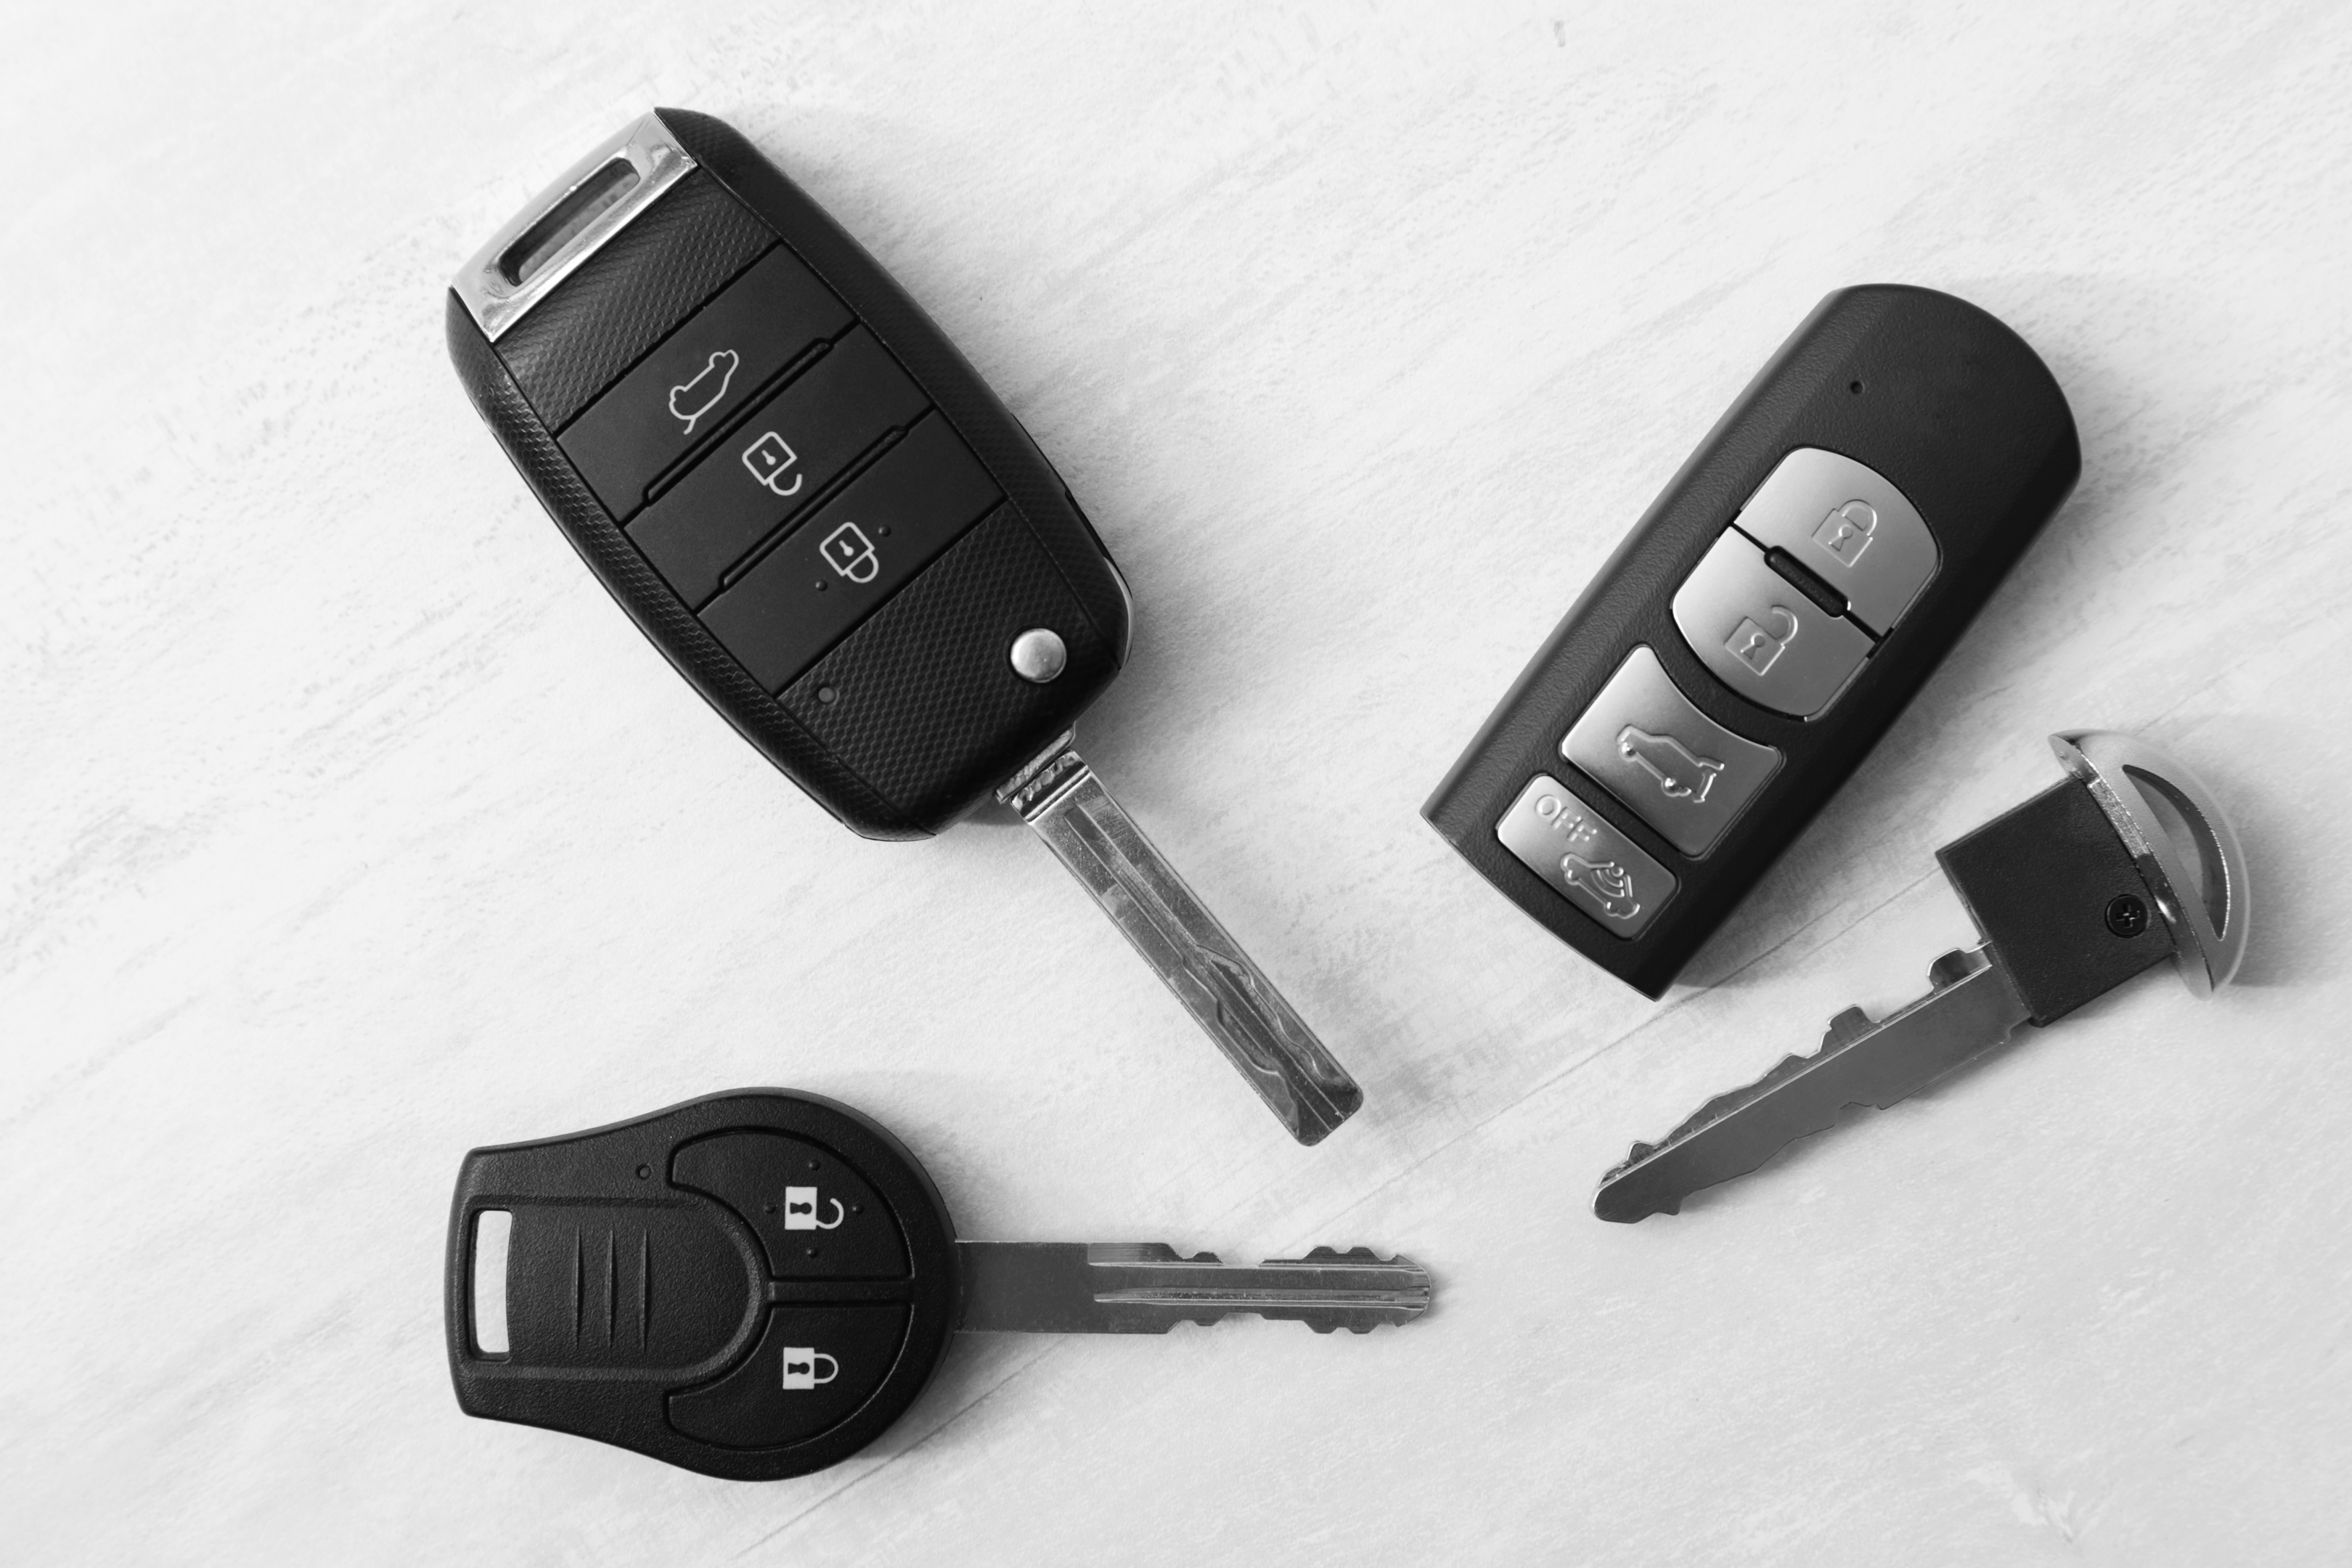 Replace traditional keys with the new car key